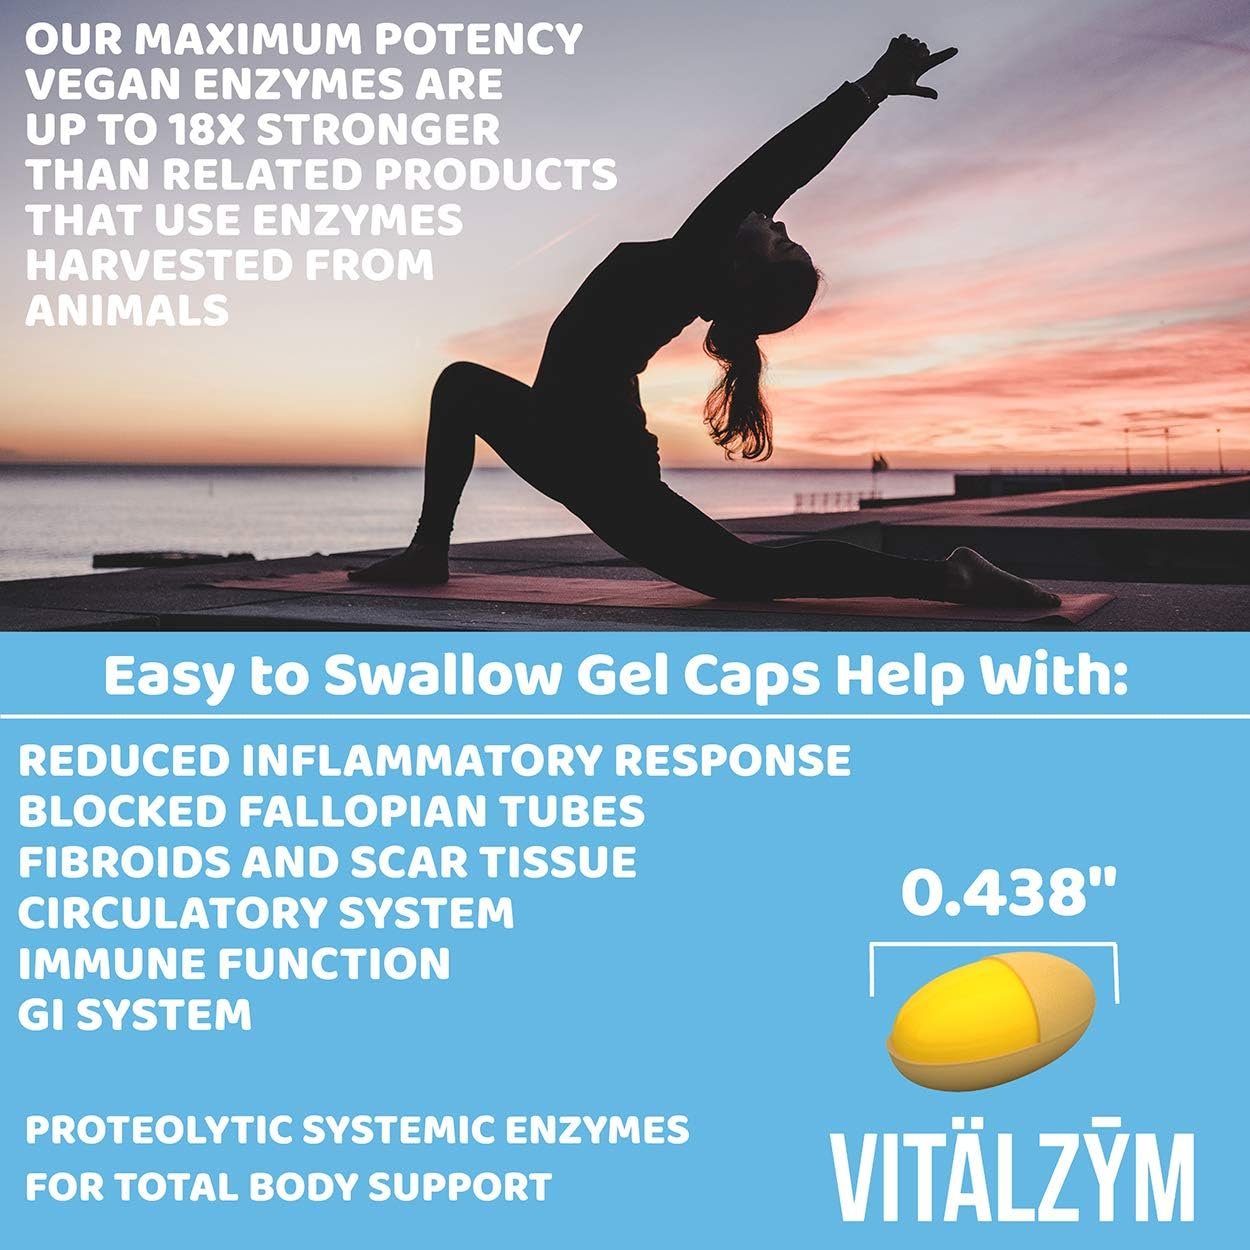 VITÄLZYM Proteolytic Systemic Enzymes Liquid Gel Capsules with Serrapeptase, Immune and Joint Support, Natural Ache Relief Plus Fertility Supplement (180 Capsules)